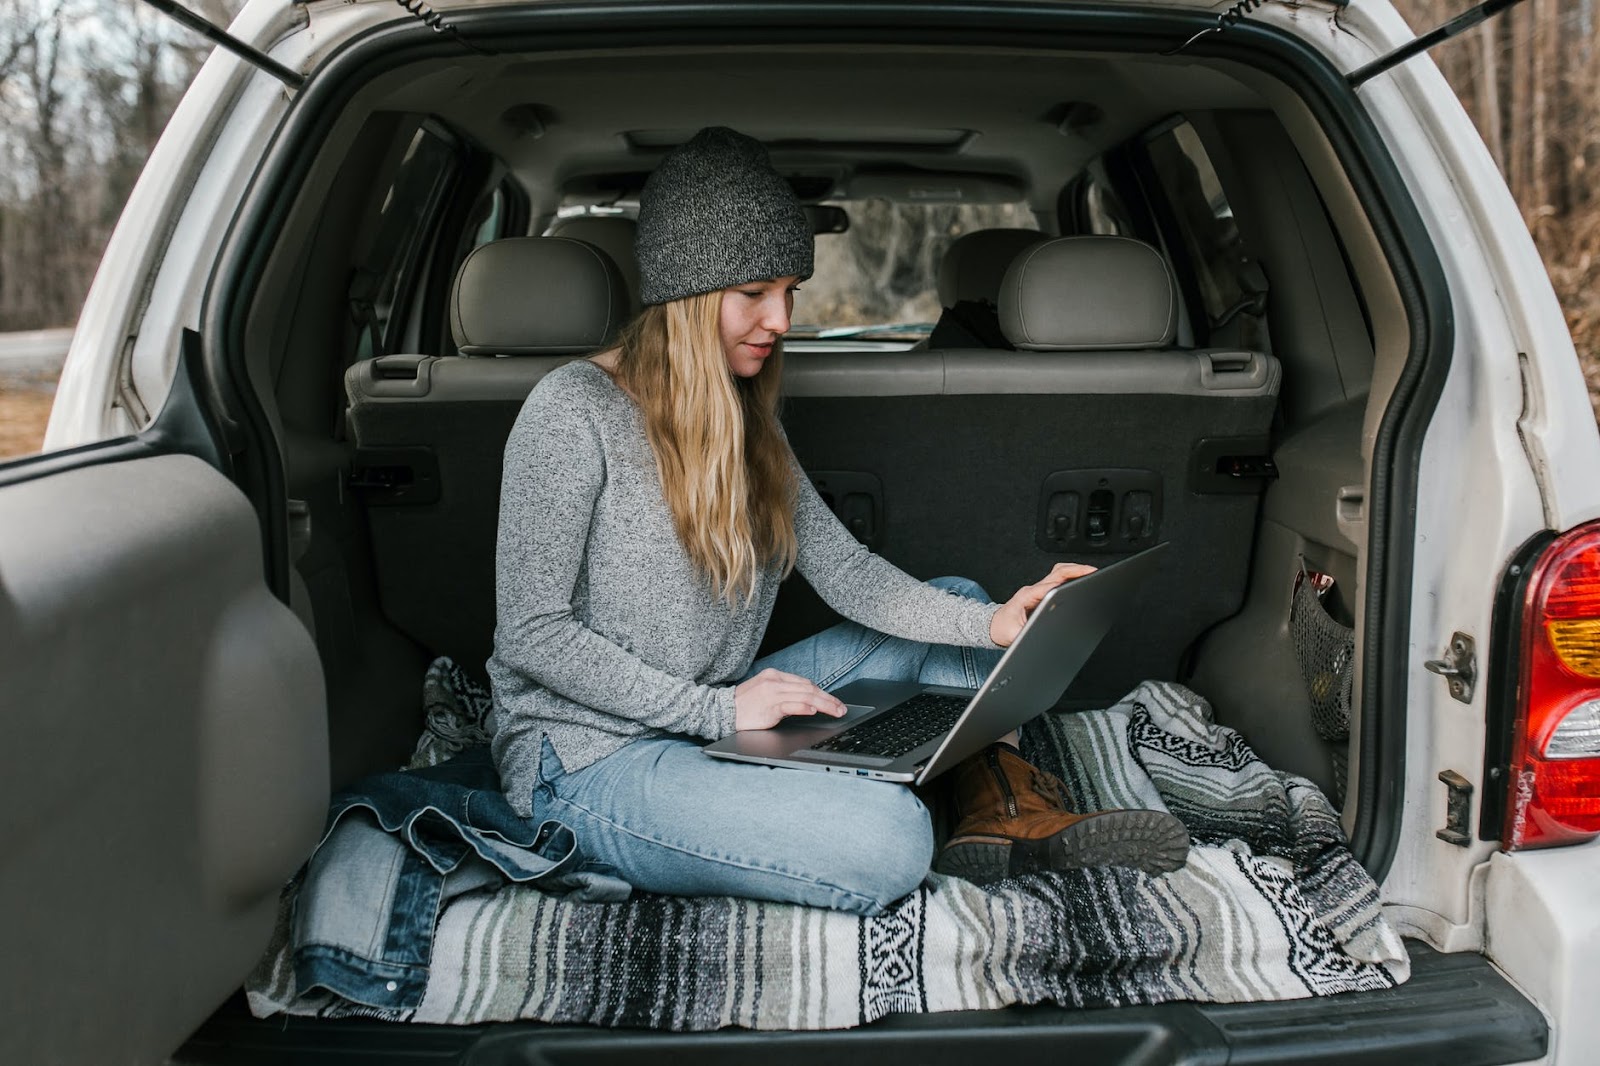 woman in grey sweater and blue denim jeans sitting on a car boot which is open. Lifestyle blogger on open laptop.